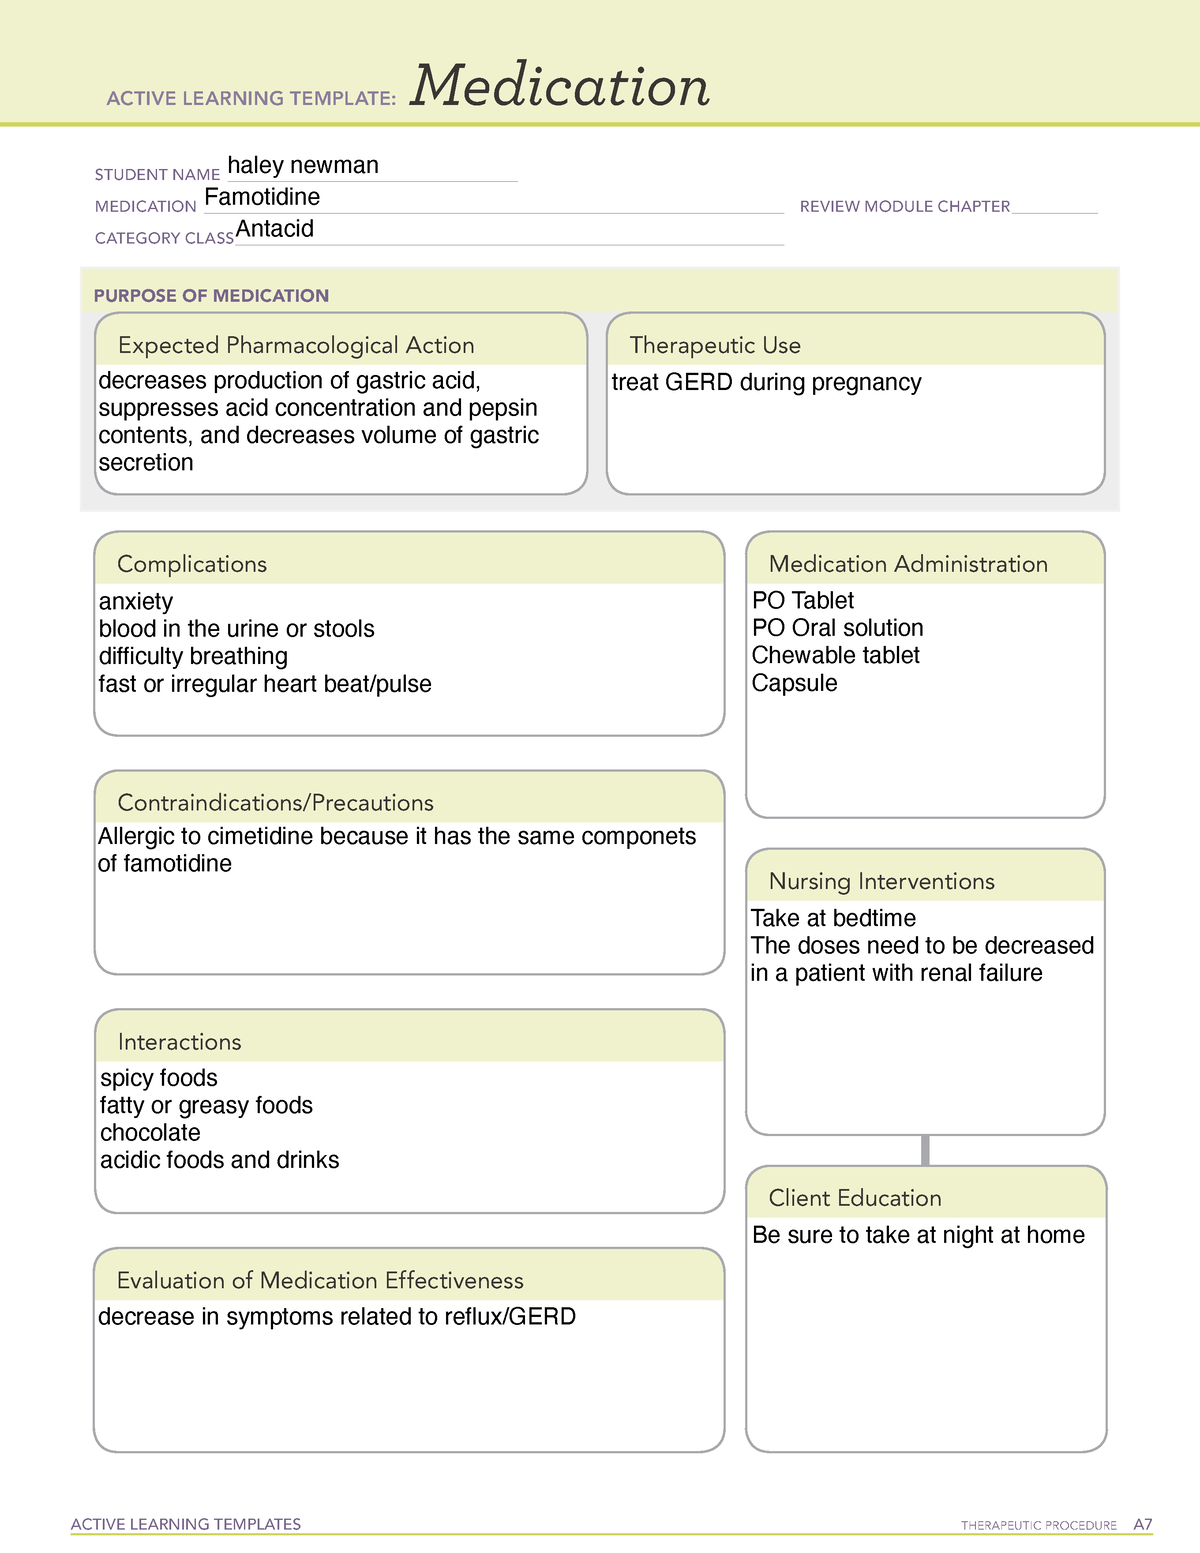 Famotidine Med Template ATI ACTIVE LEARNING TEMPLATES THERAPEUTIC